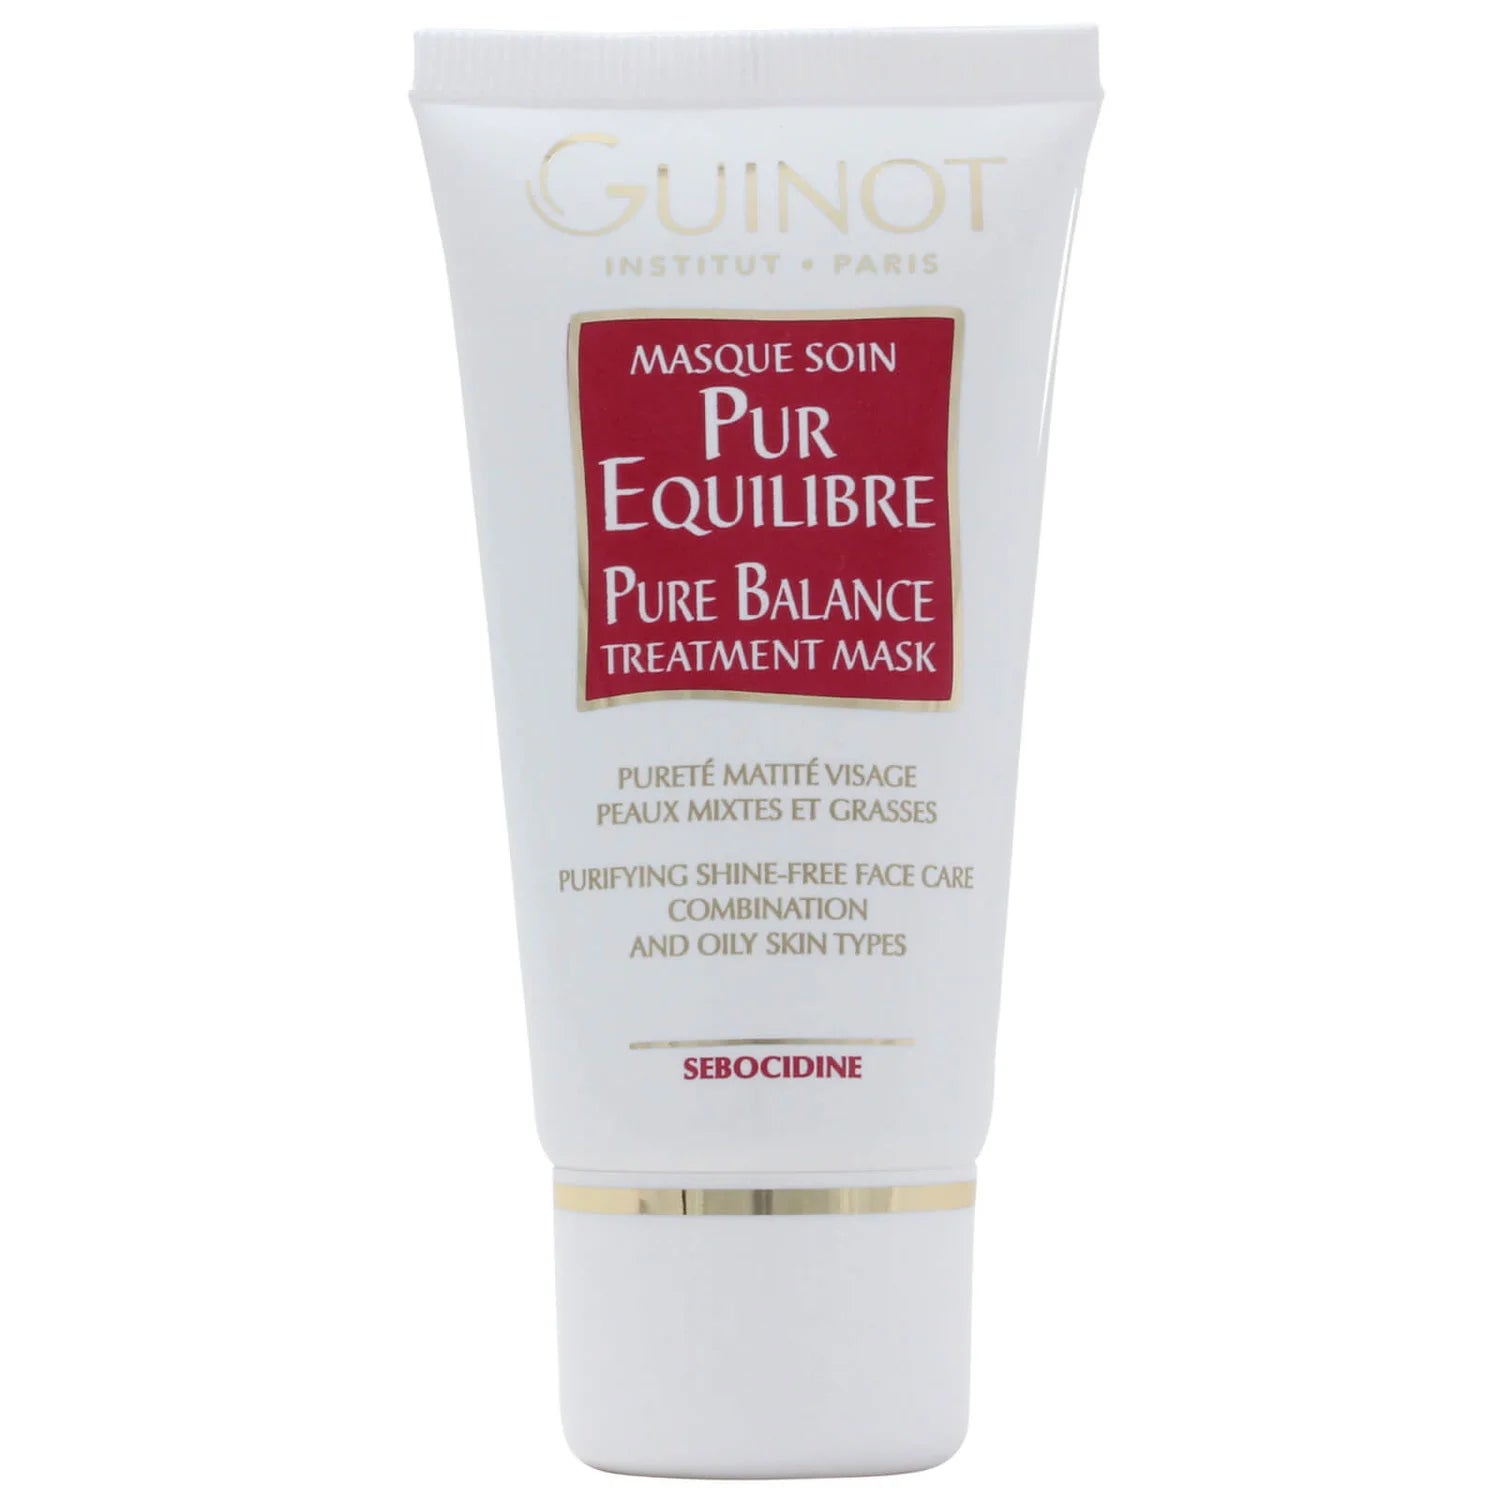 Guinot Pure Balance Treatment Mask (Masque Pur Equilibre) product image. 